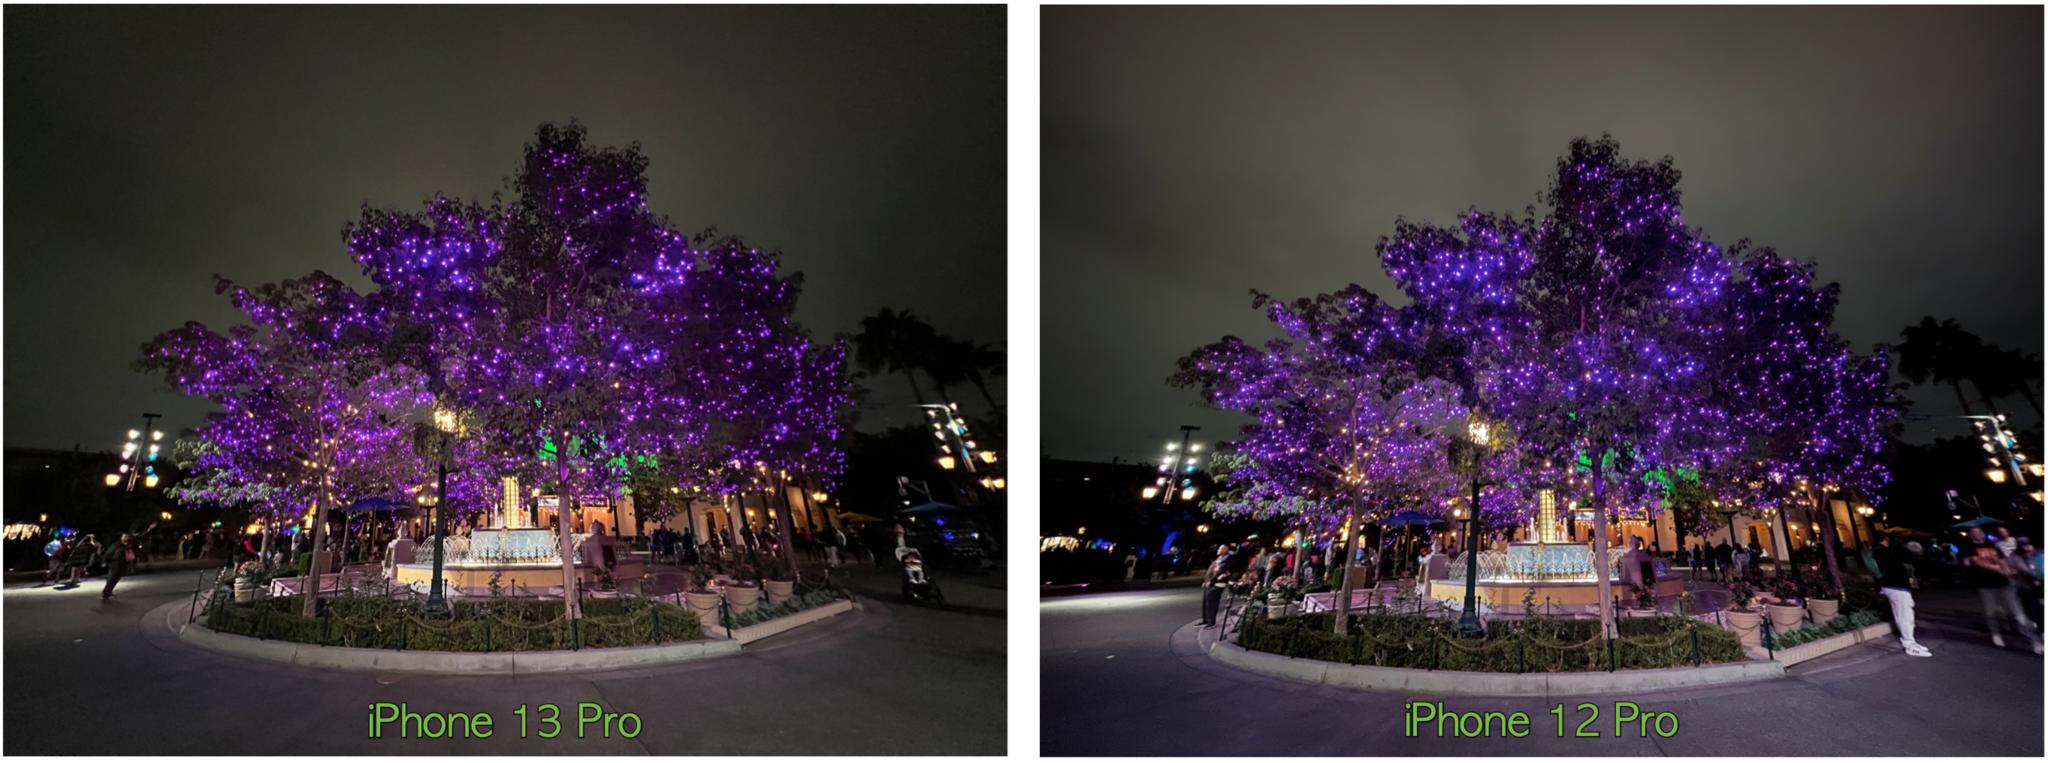 The Iphone 13 Pro Is Not Only A Great, How To Control Landscape Lighting With Iphone 12